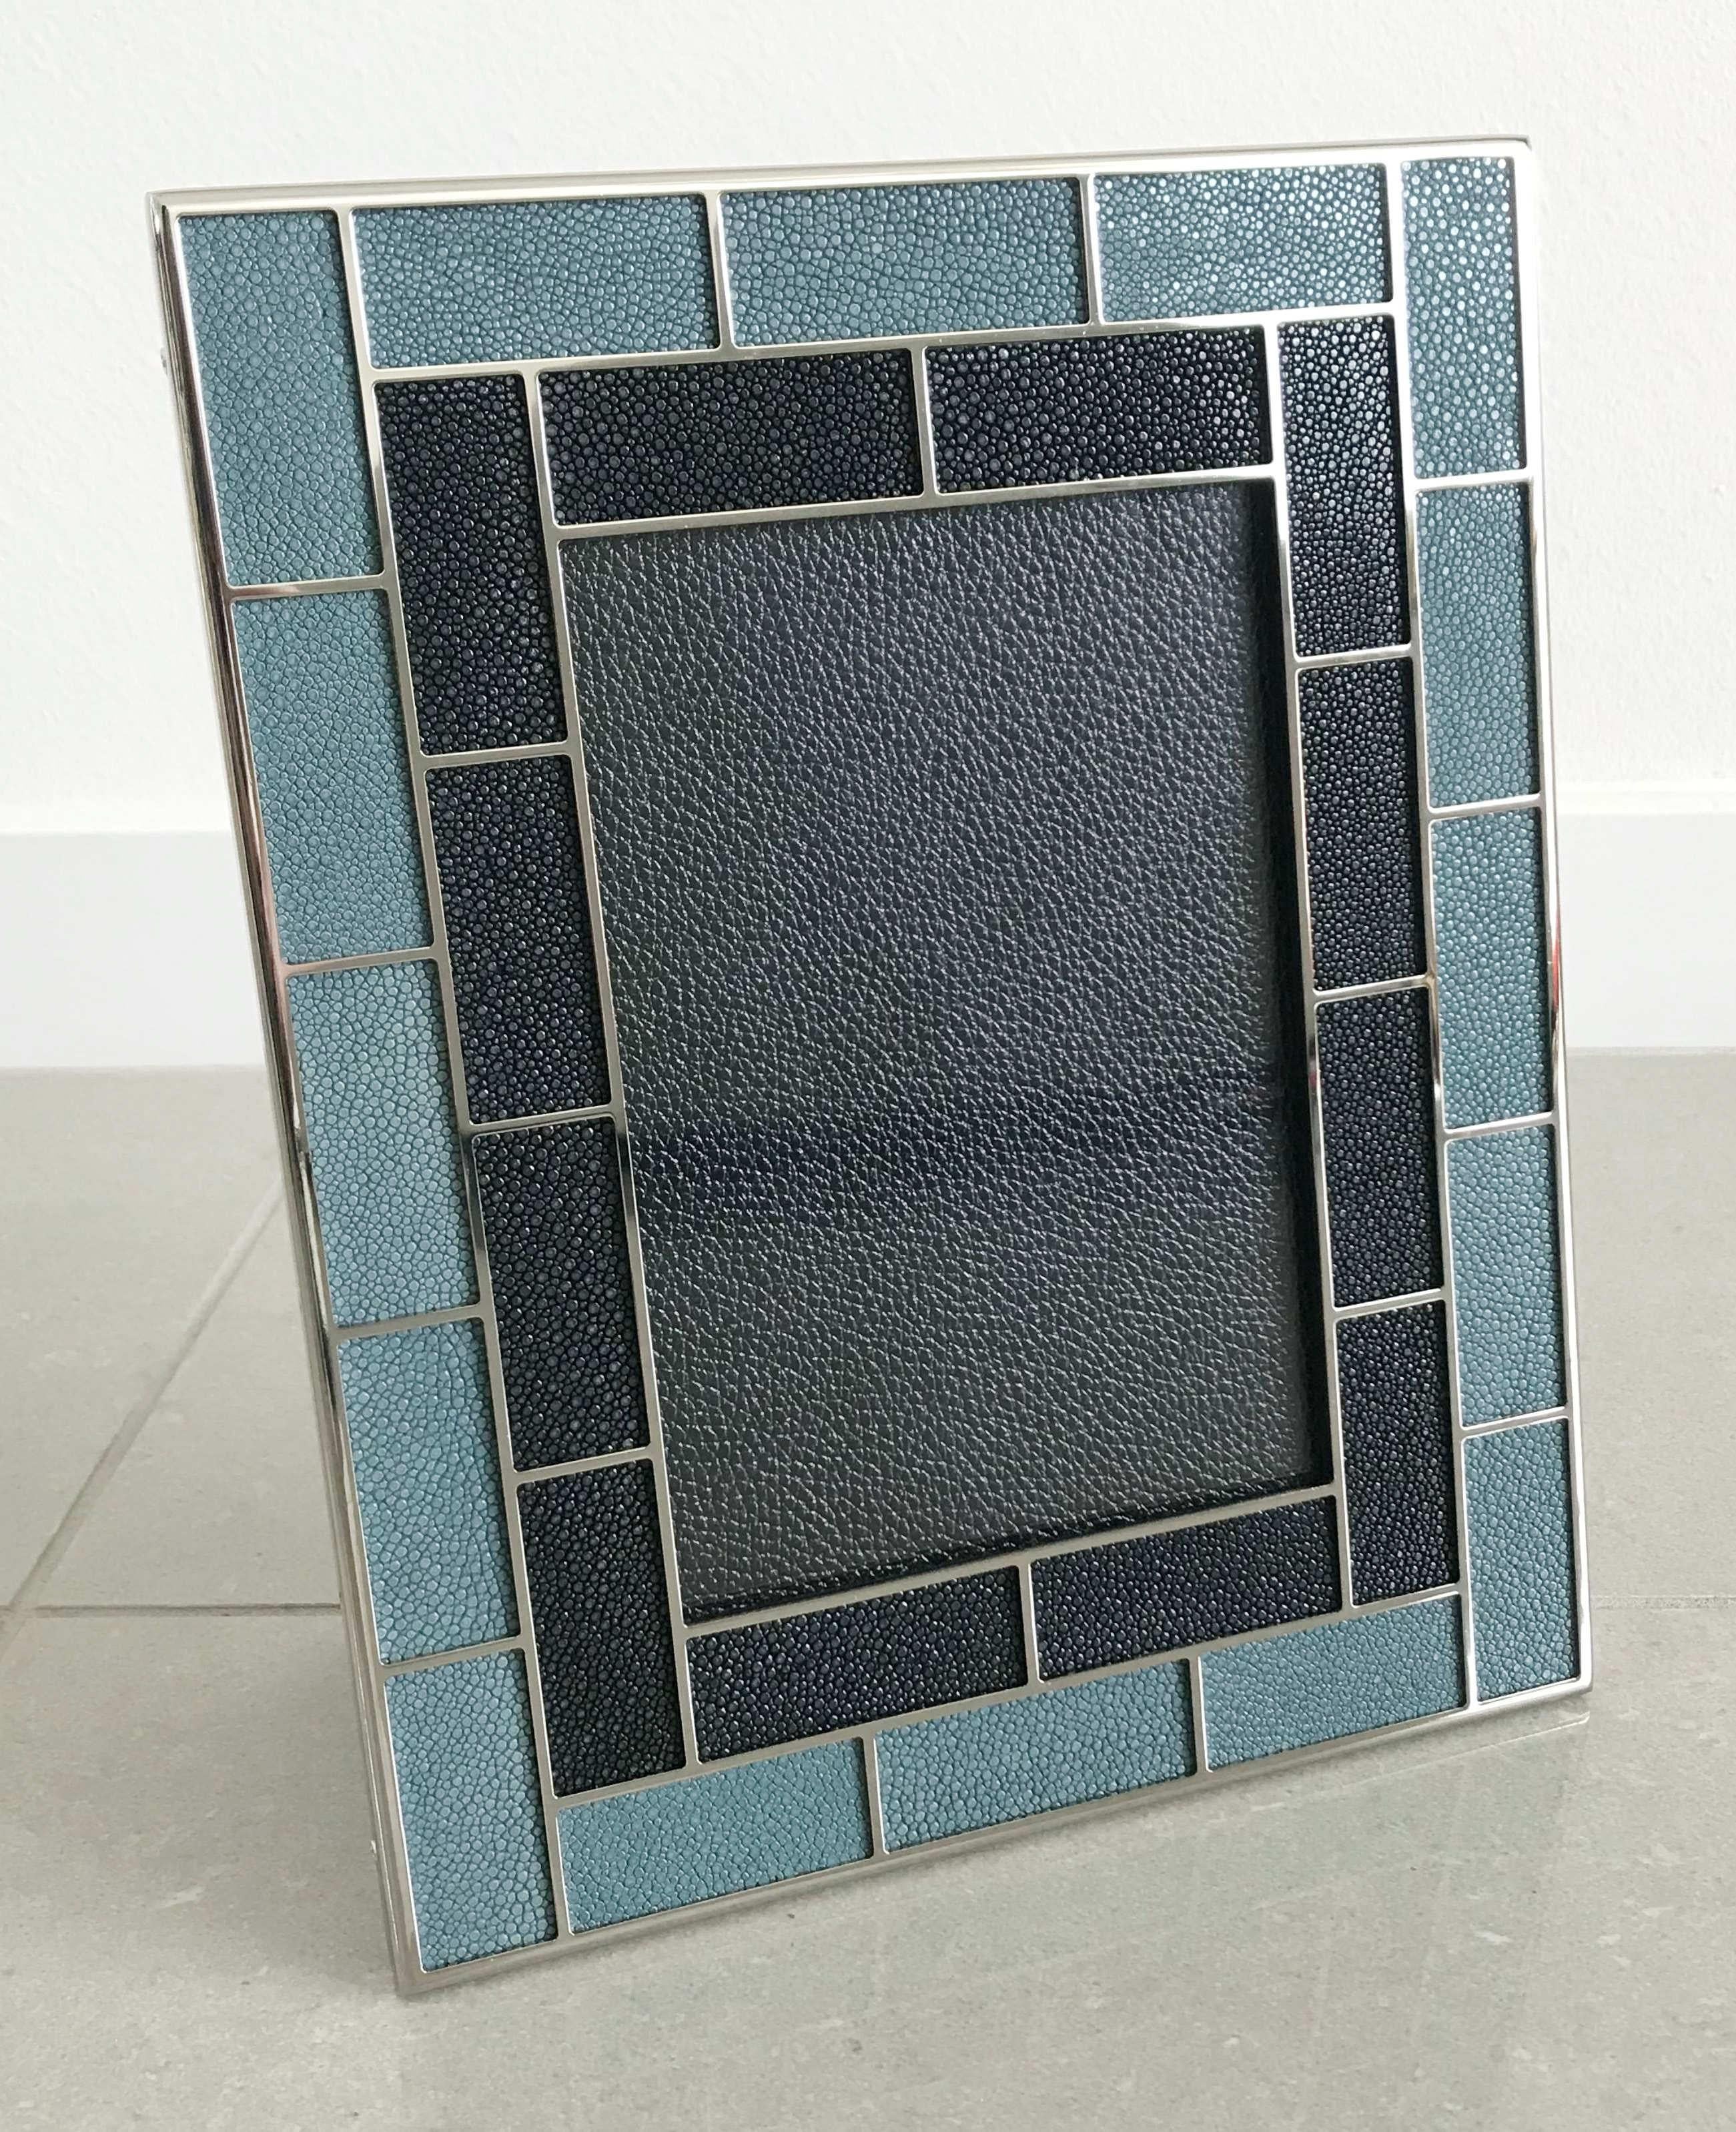 Black and blue shagreen leather and nickel-plated picture frame by Fabio Ltd
Measures: Height 10.5 inches / Width 8.5 inches / Depth 1 inch
Photo size: 5 inches by 7 inches
1 in stock in Palm Springs currently ON HOLIDAY SALE for $699 !!!
Order